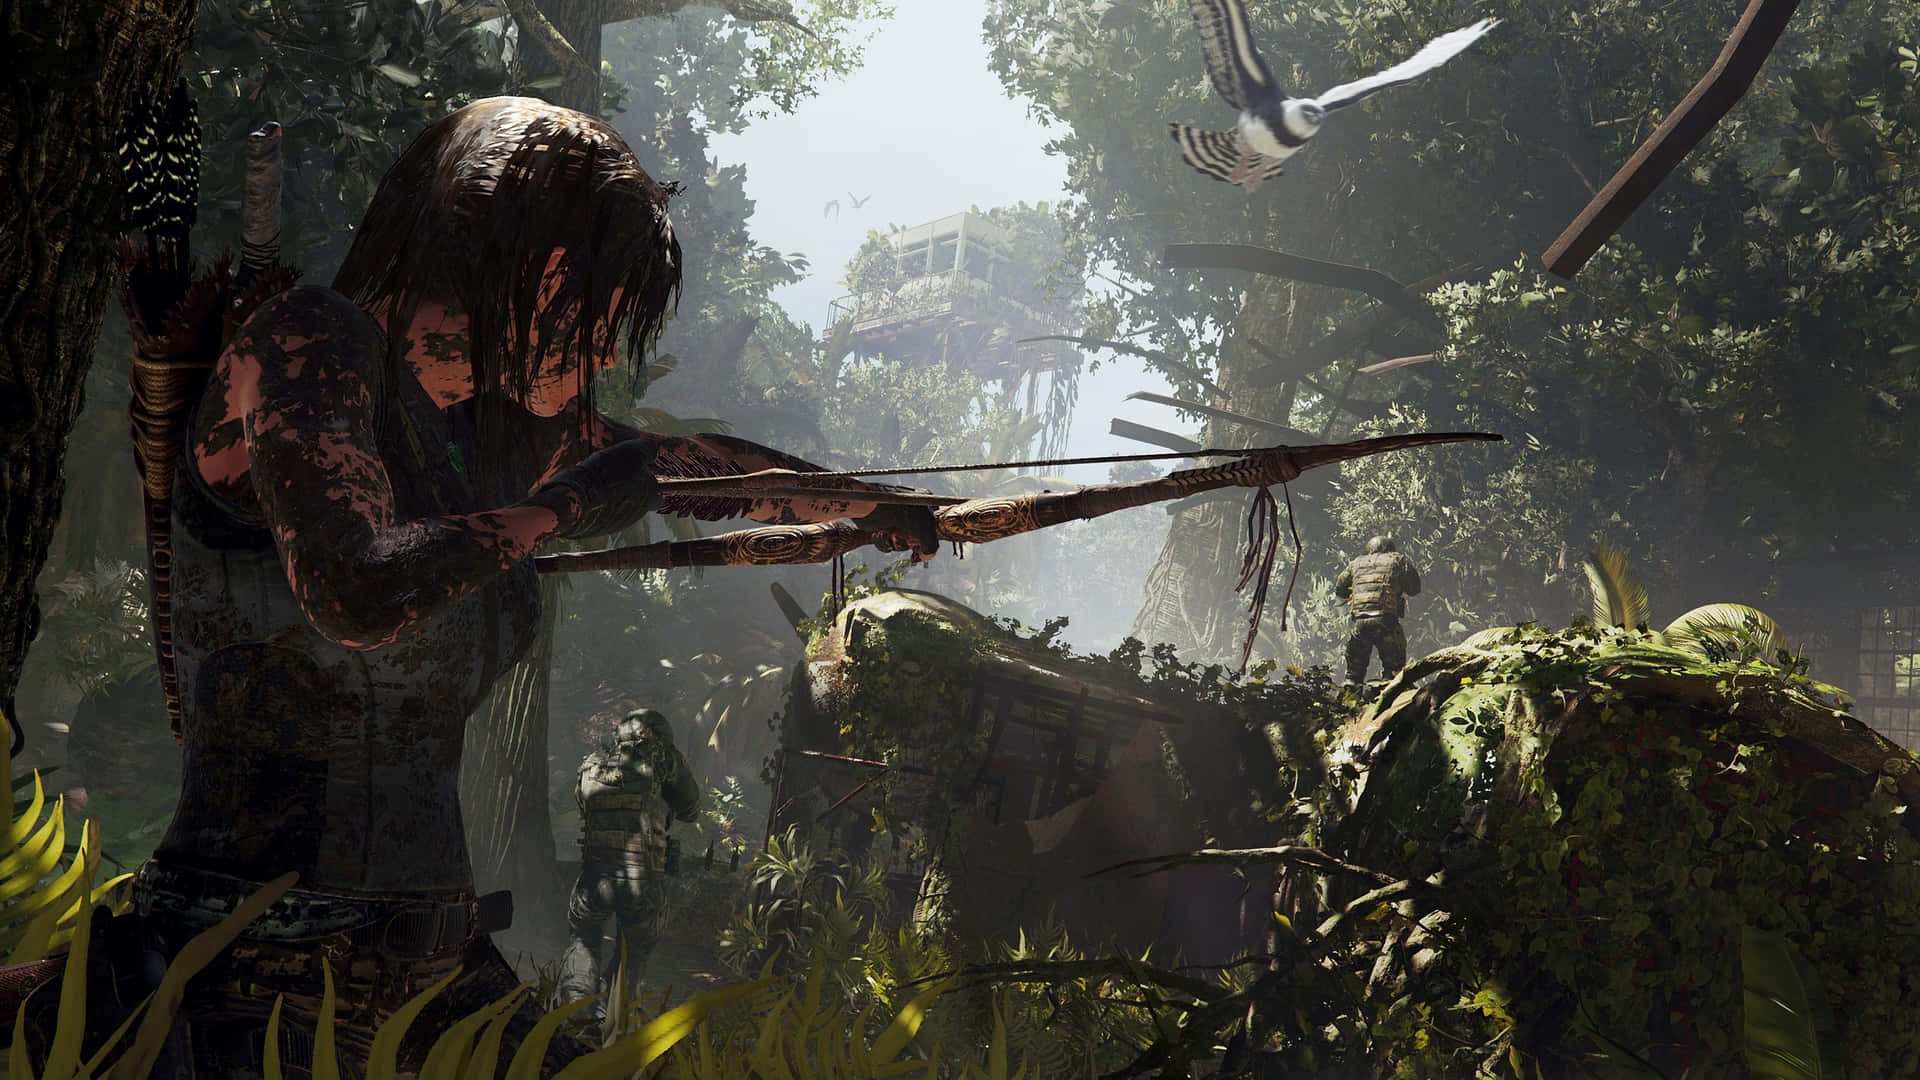 The Tomb Raider Is In The Jungle With A Bow